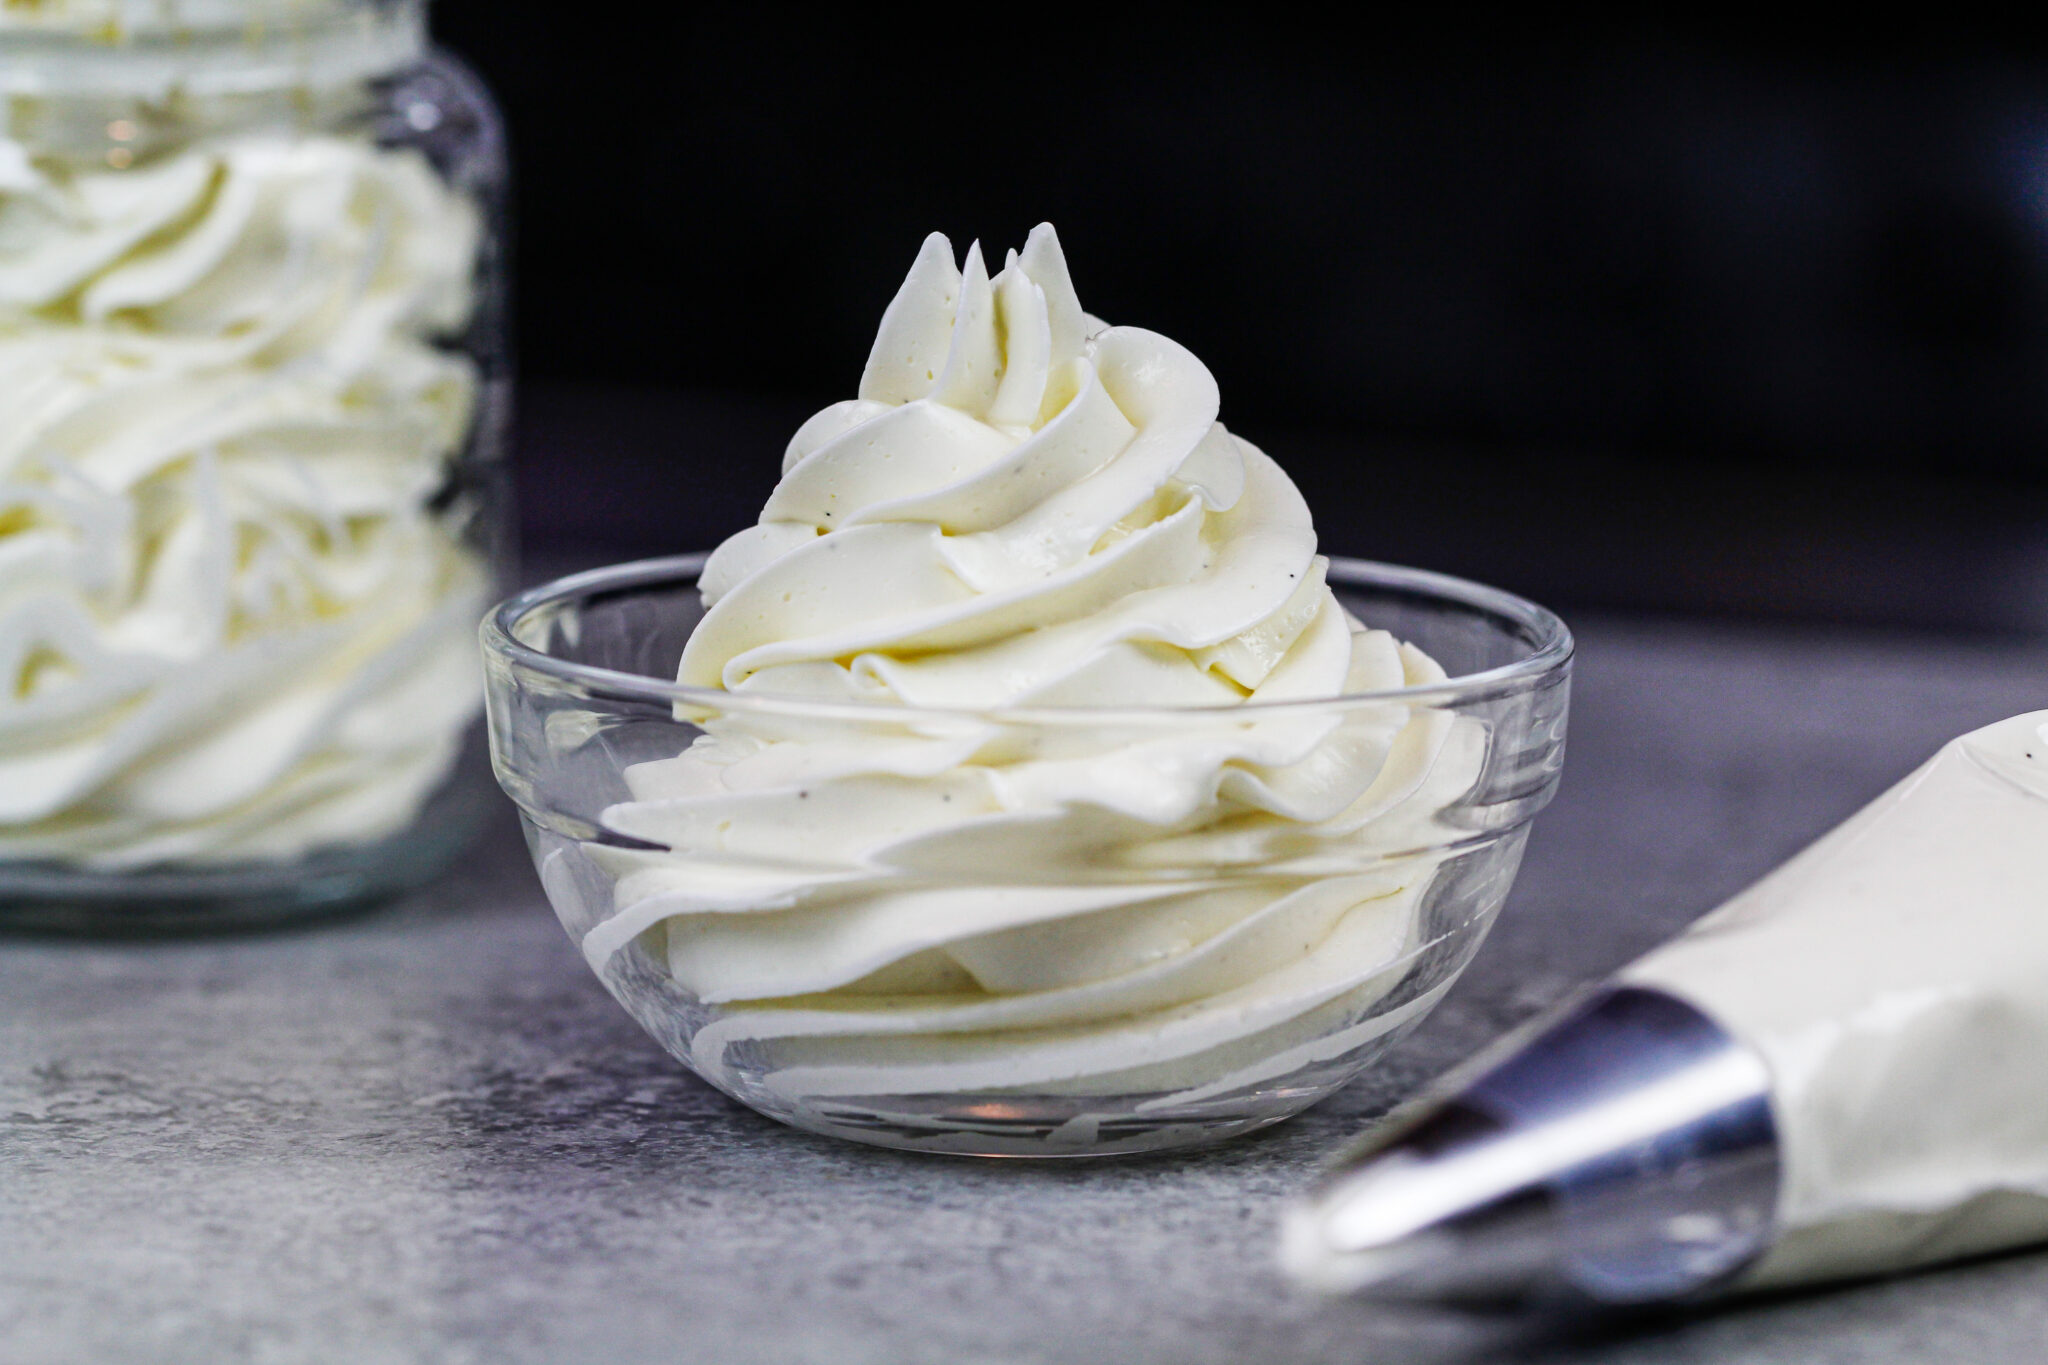 Mascarpone Cream - The Perfect Topping for Any Dessert